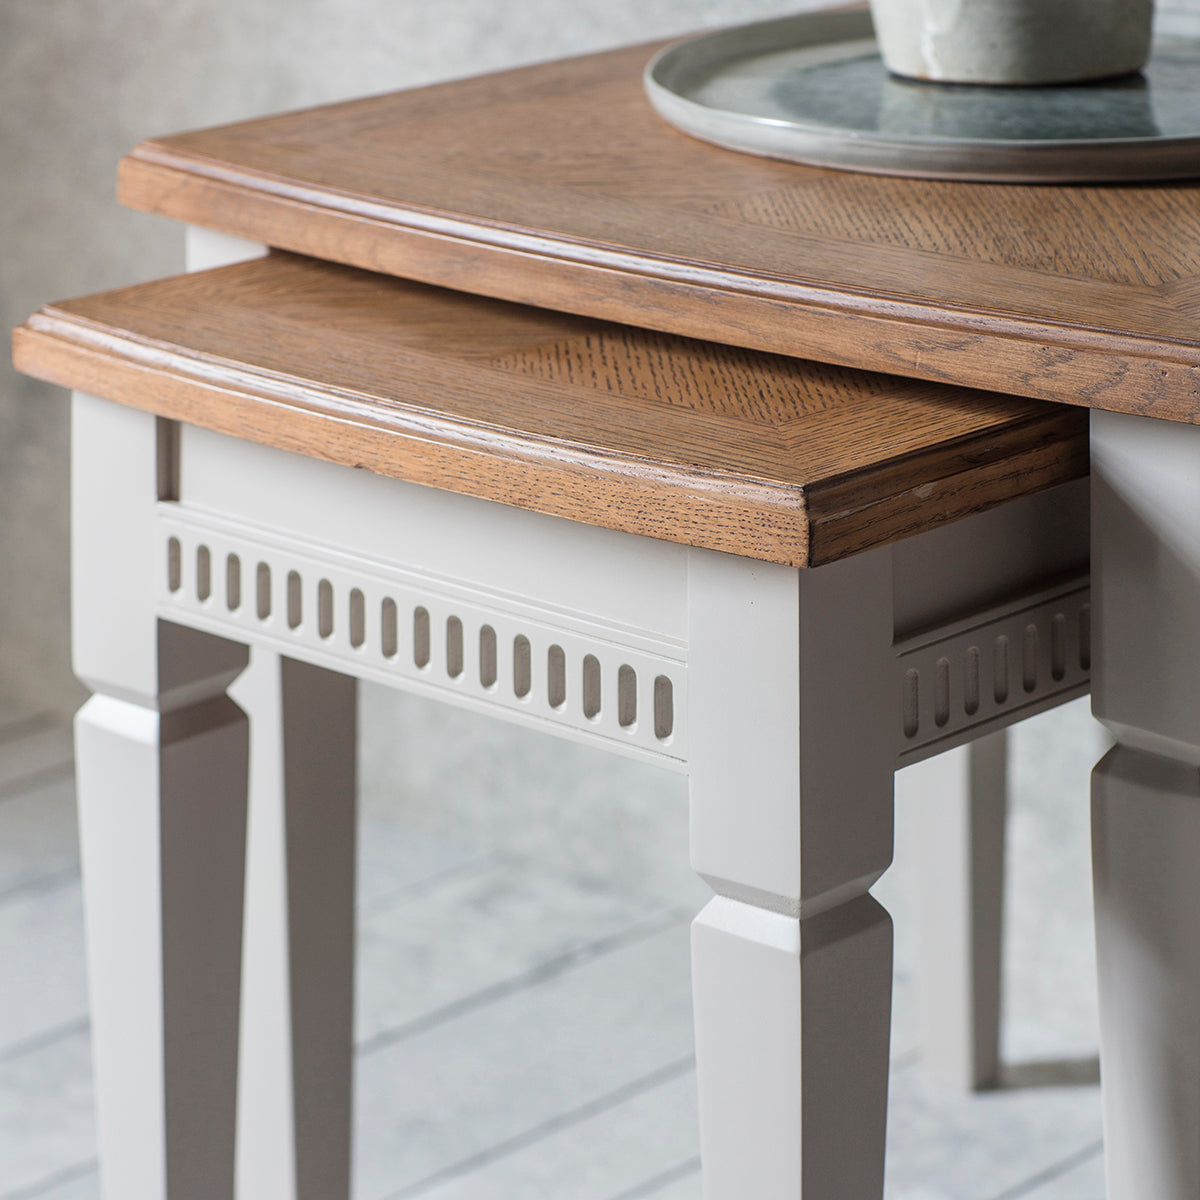 Beatrice Nest of 2 Tables - Taupe